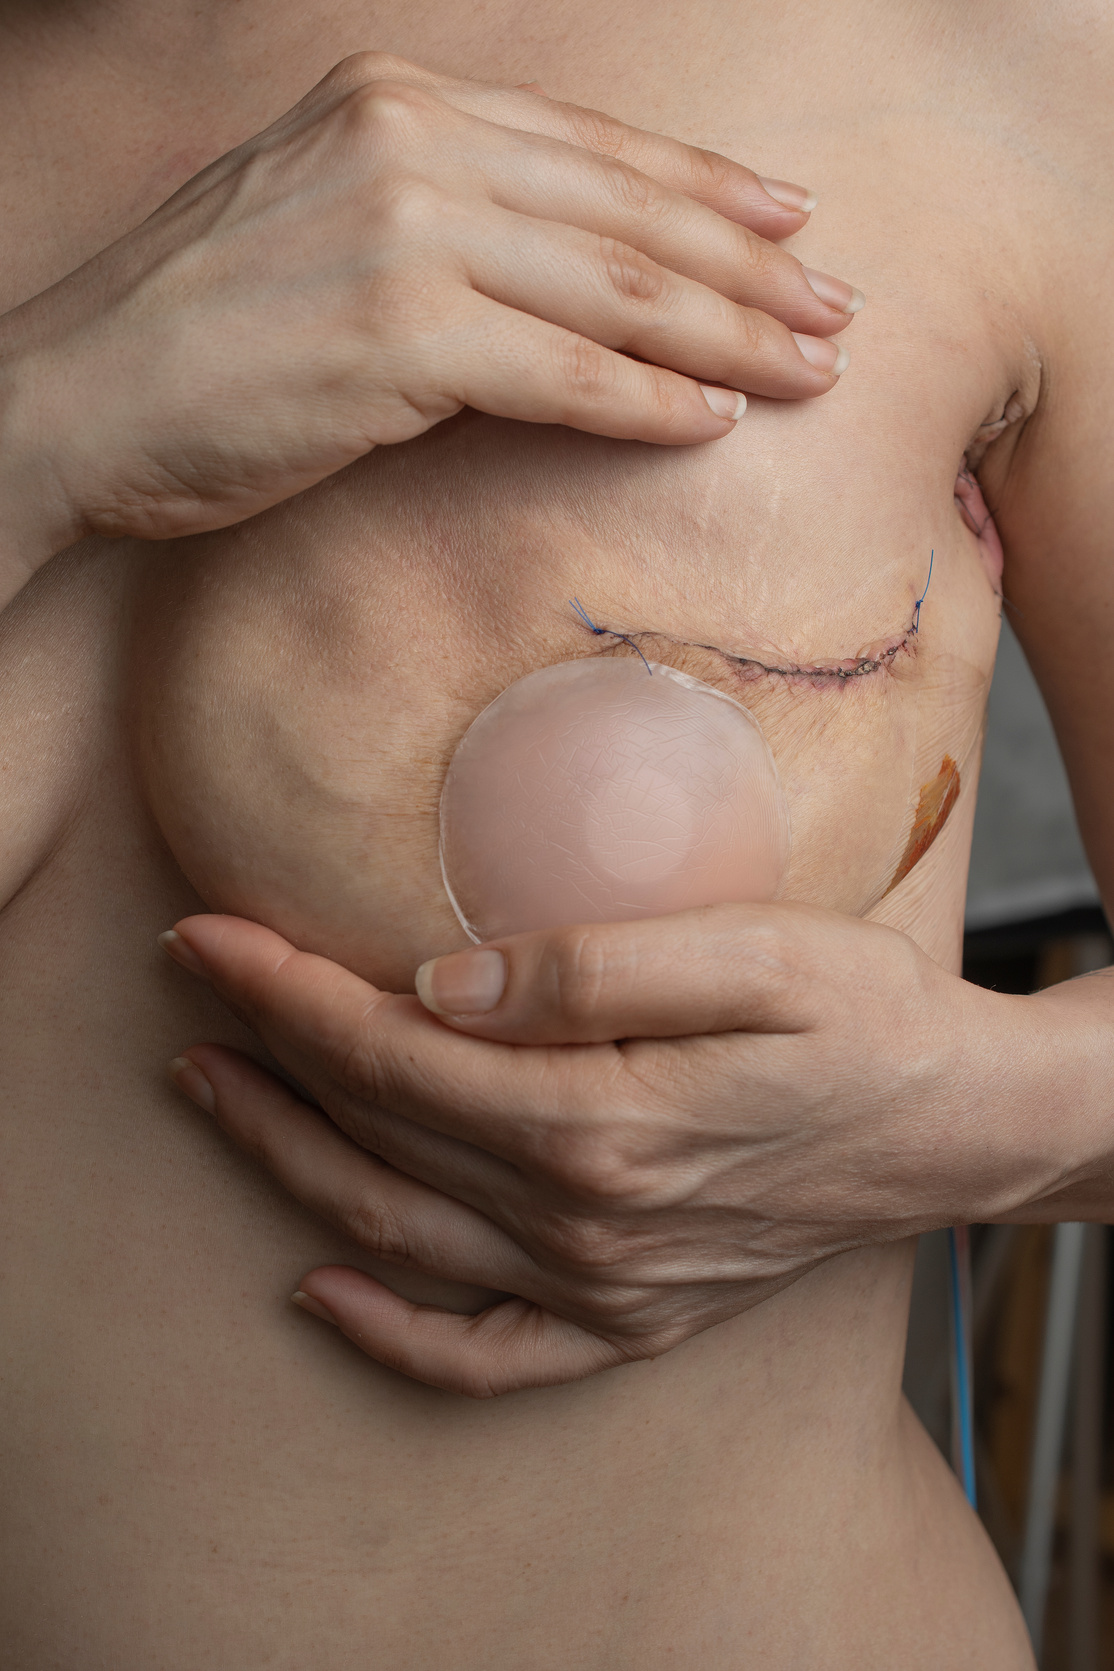 Scars from Mastectomy Surgery Due to Breast Cancer